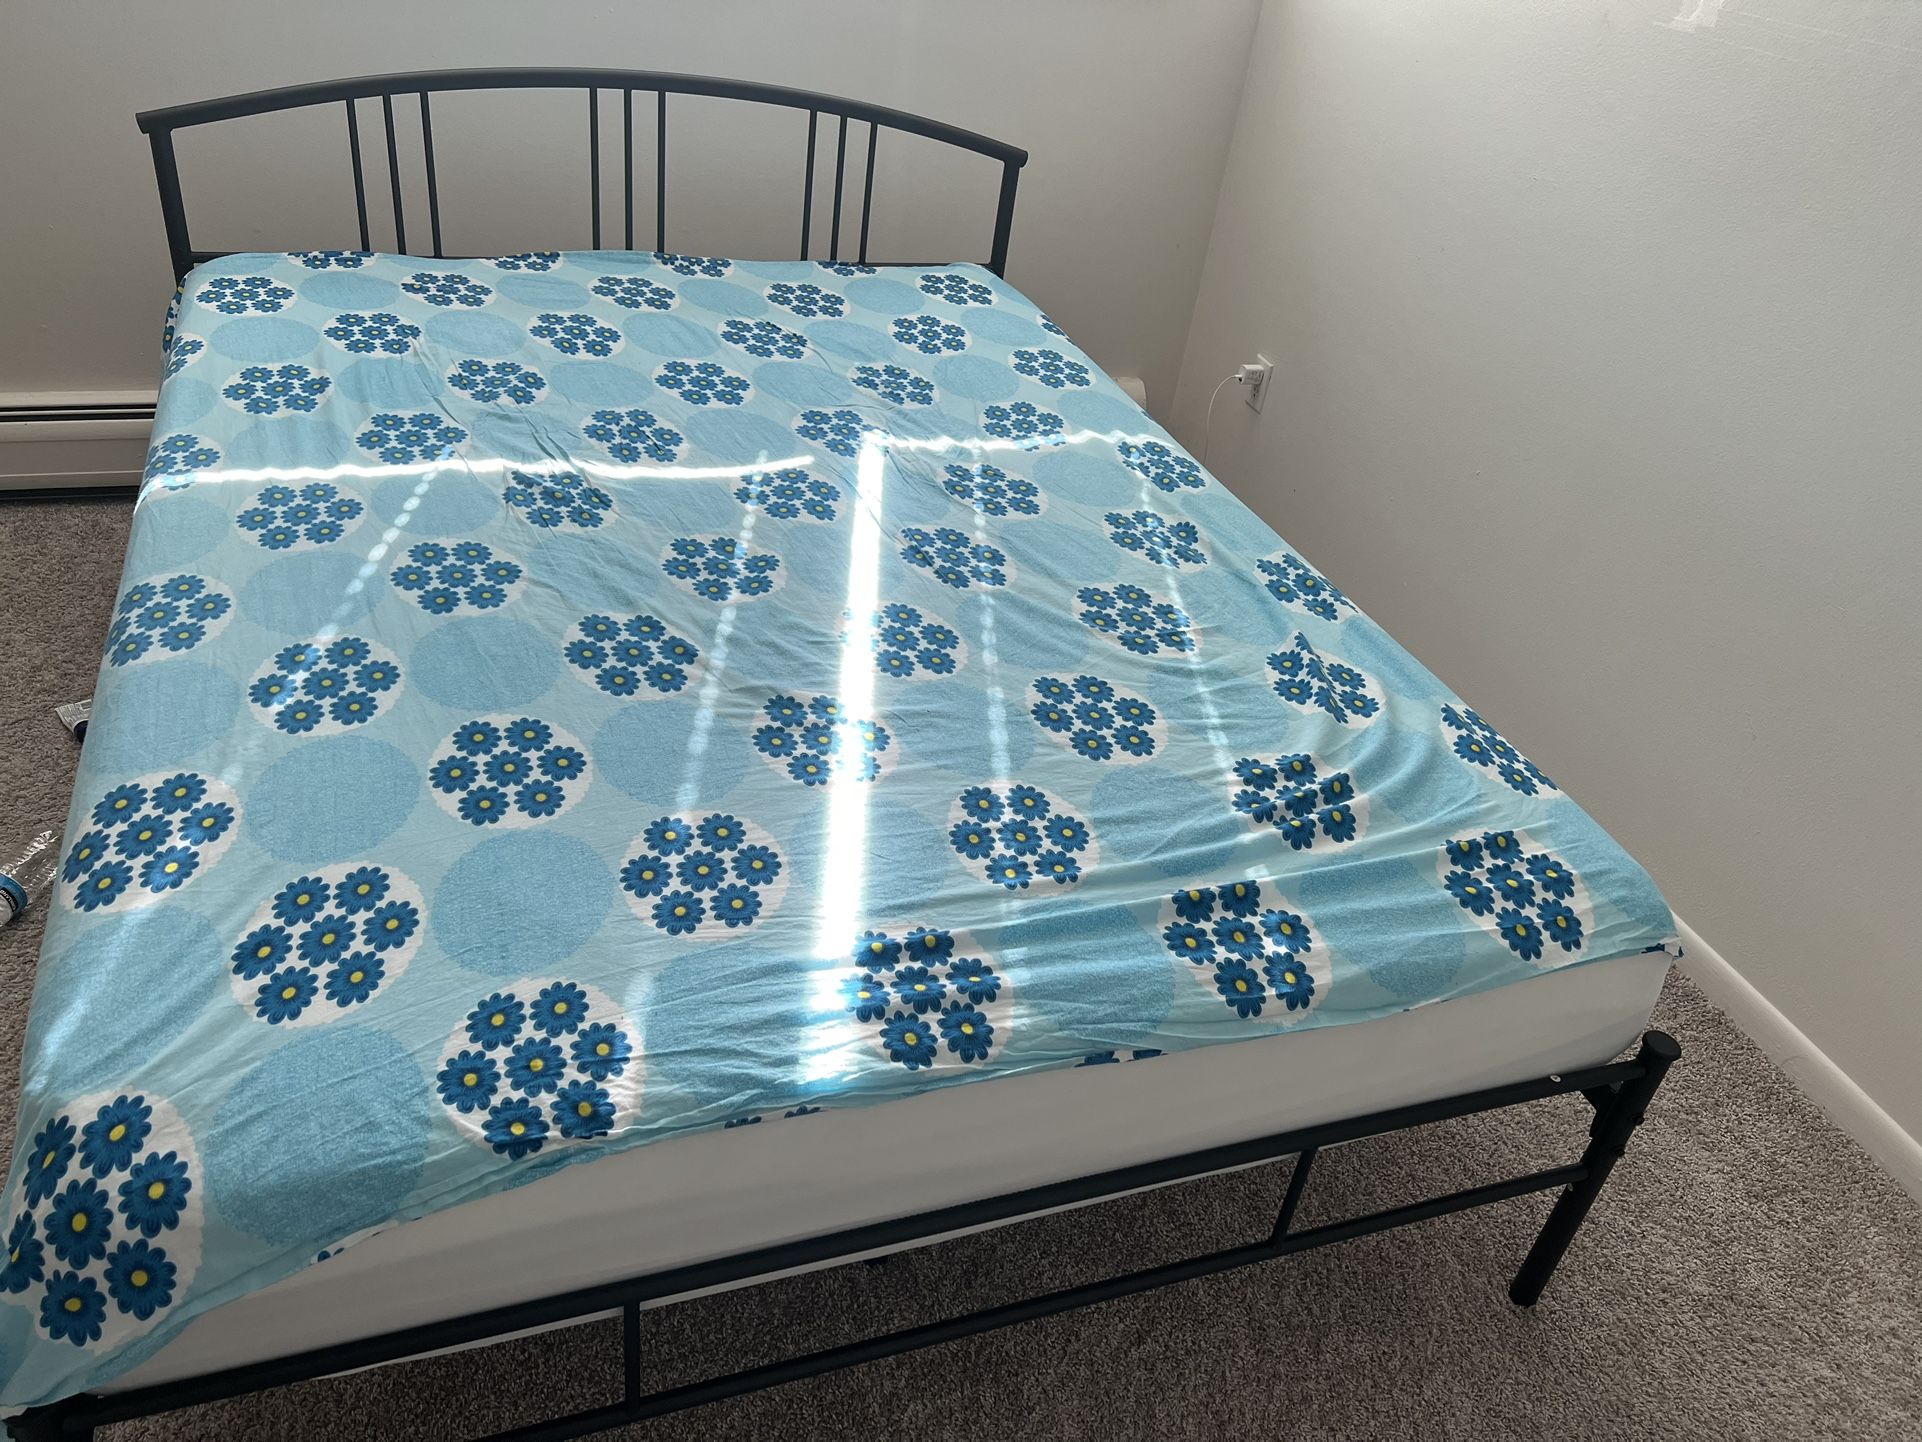 Queen Size Mattress With Frame